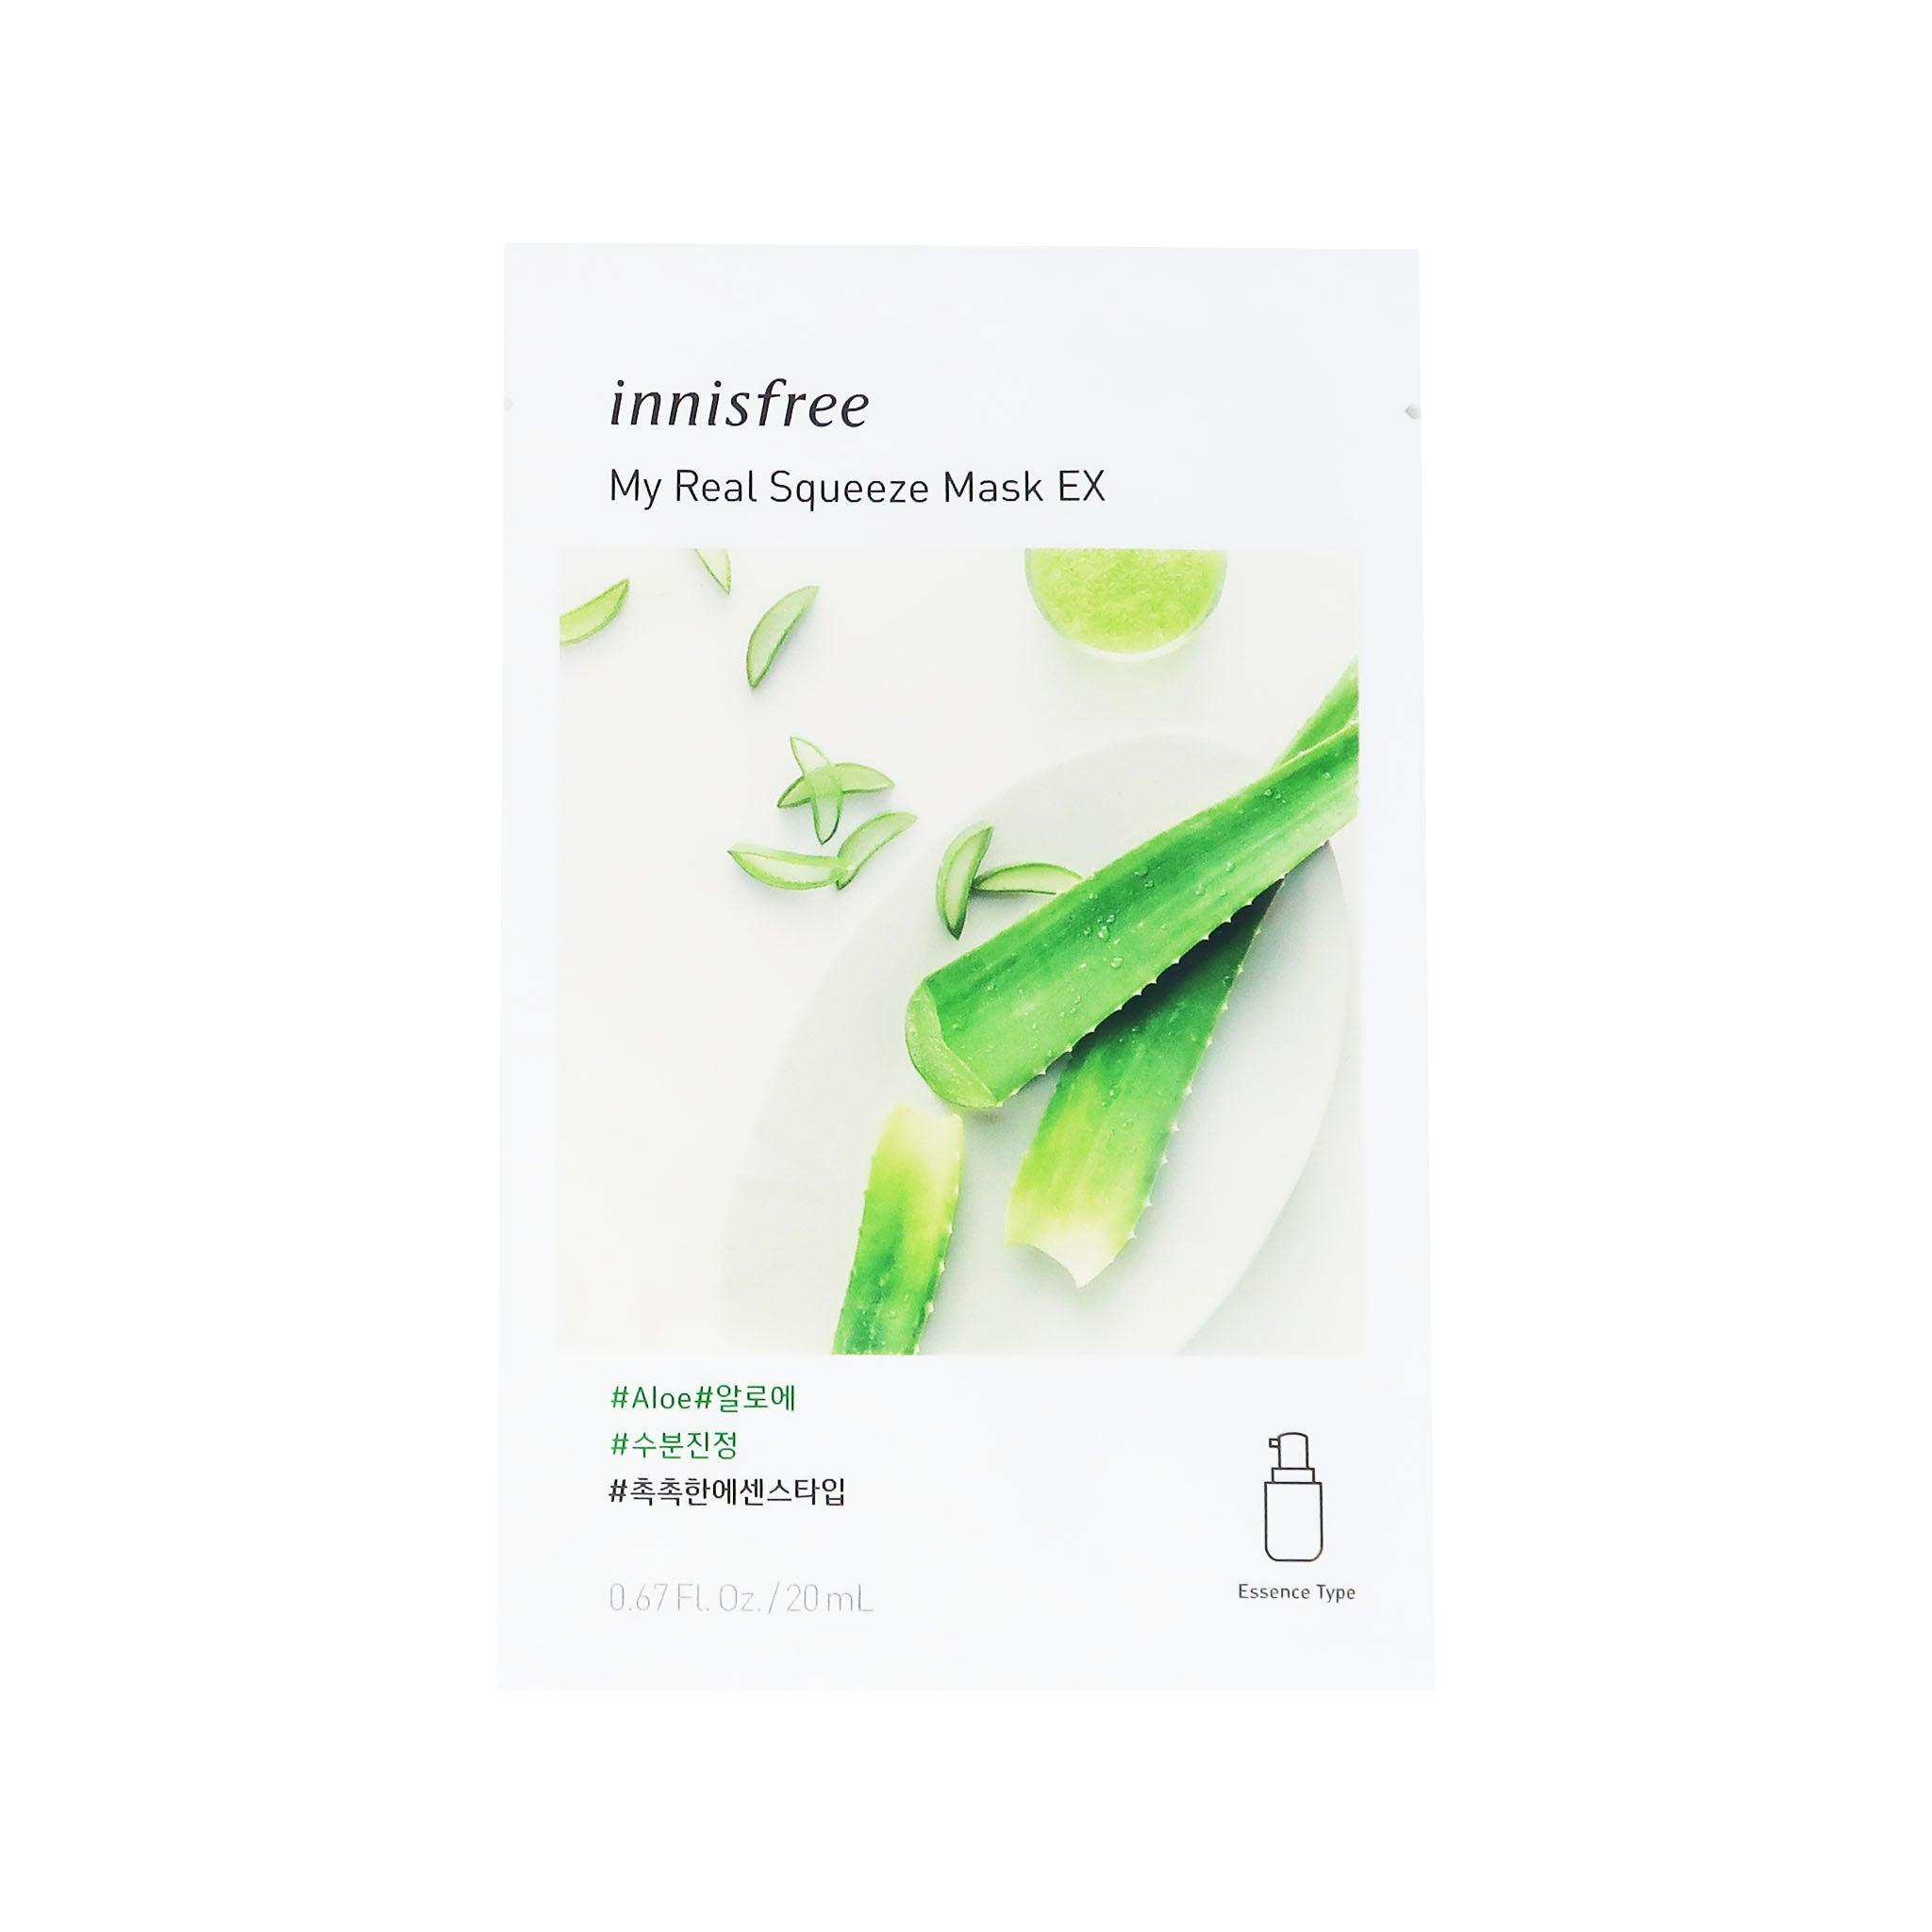 INNISFREE My Real Squeeze Mask EX - Aloe (Soothe & Hydrate) [1PC]